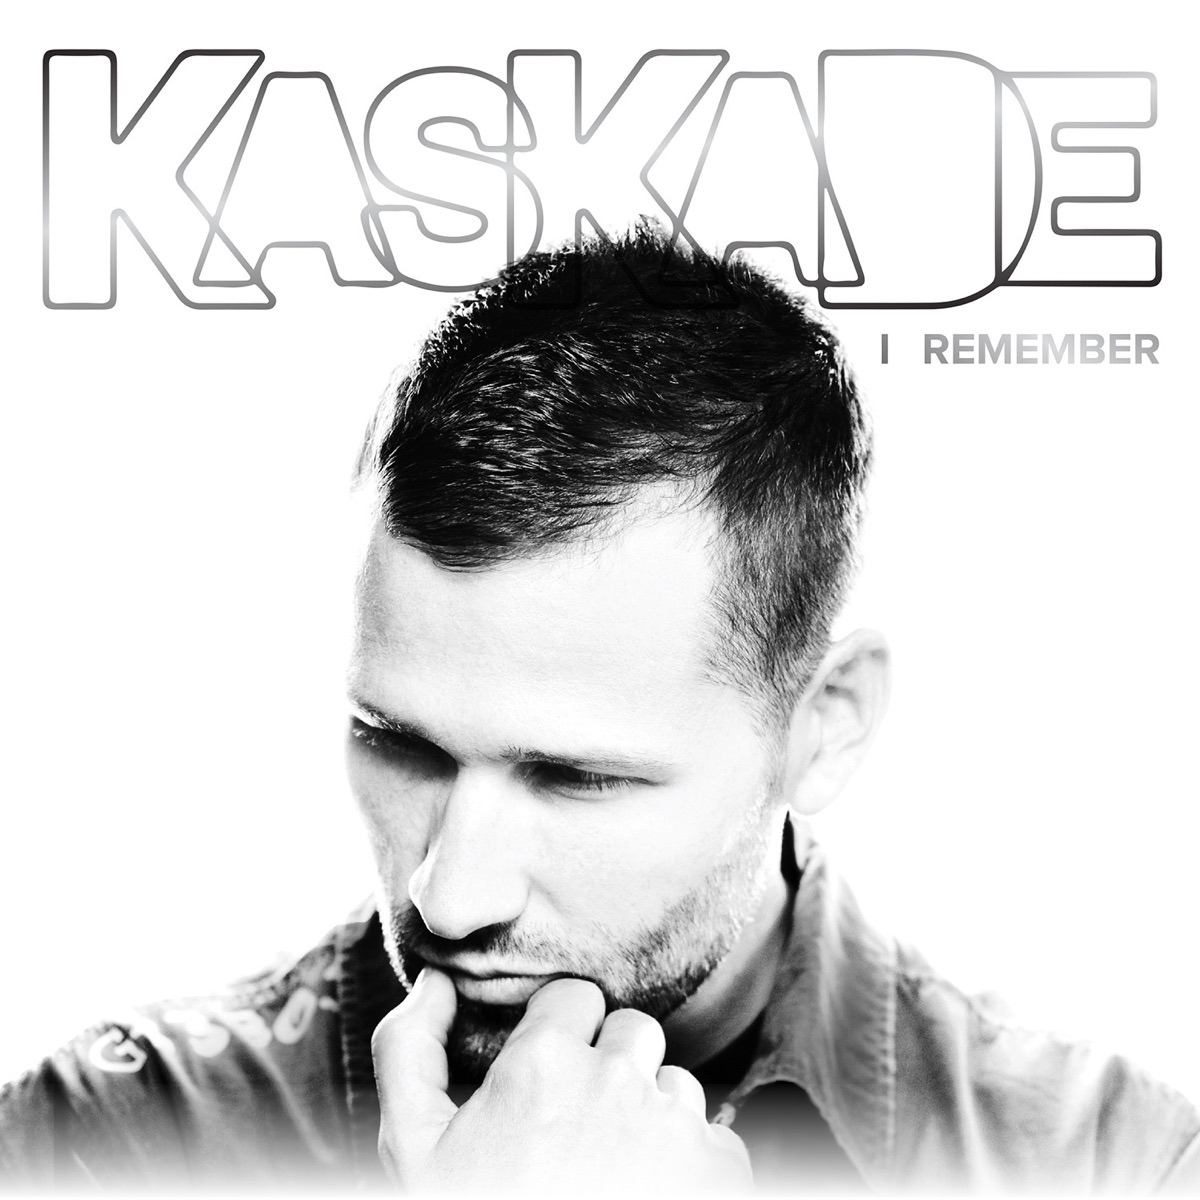 I Remember by Kaskade on Apple Music